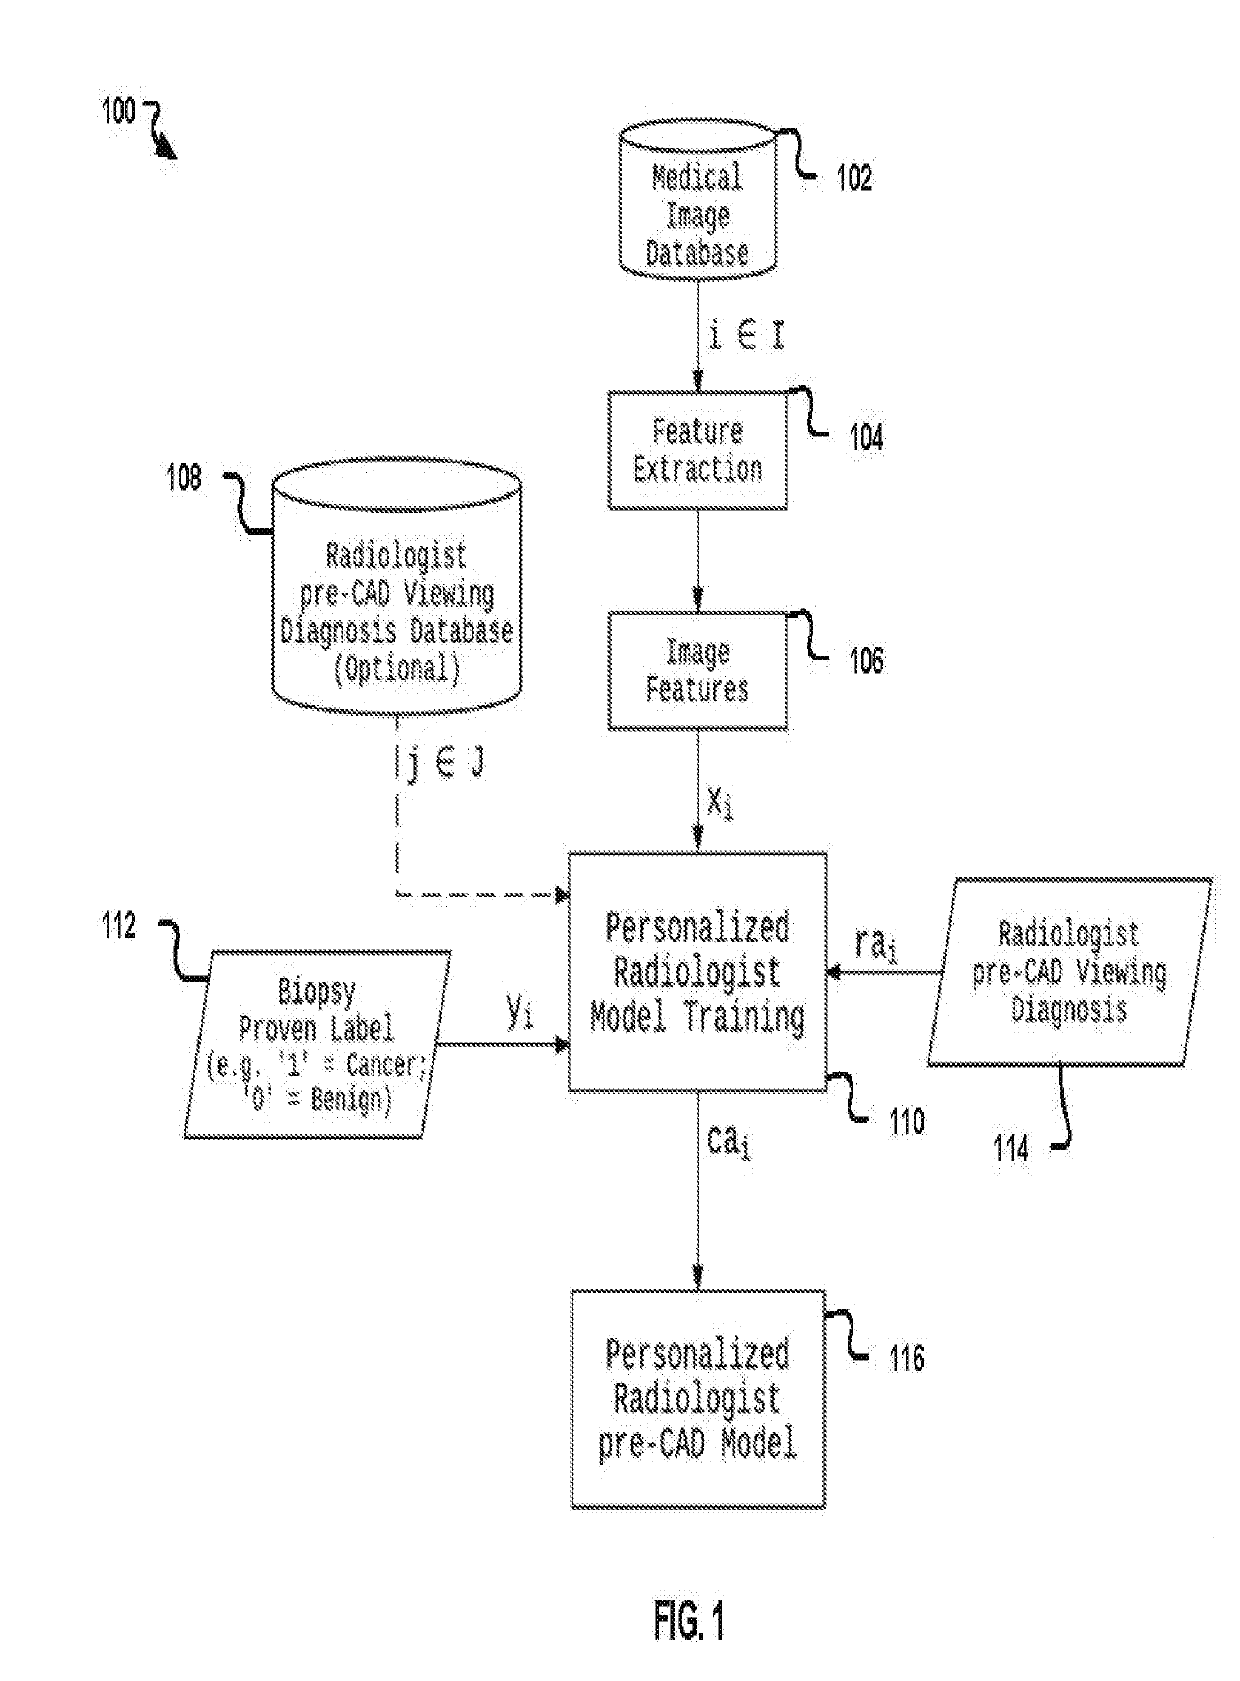 Method and means of cad system personalization to provide a confidence level indicator for cad system recommendations